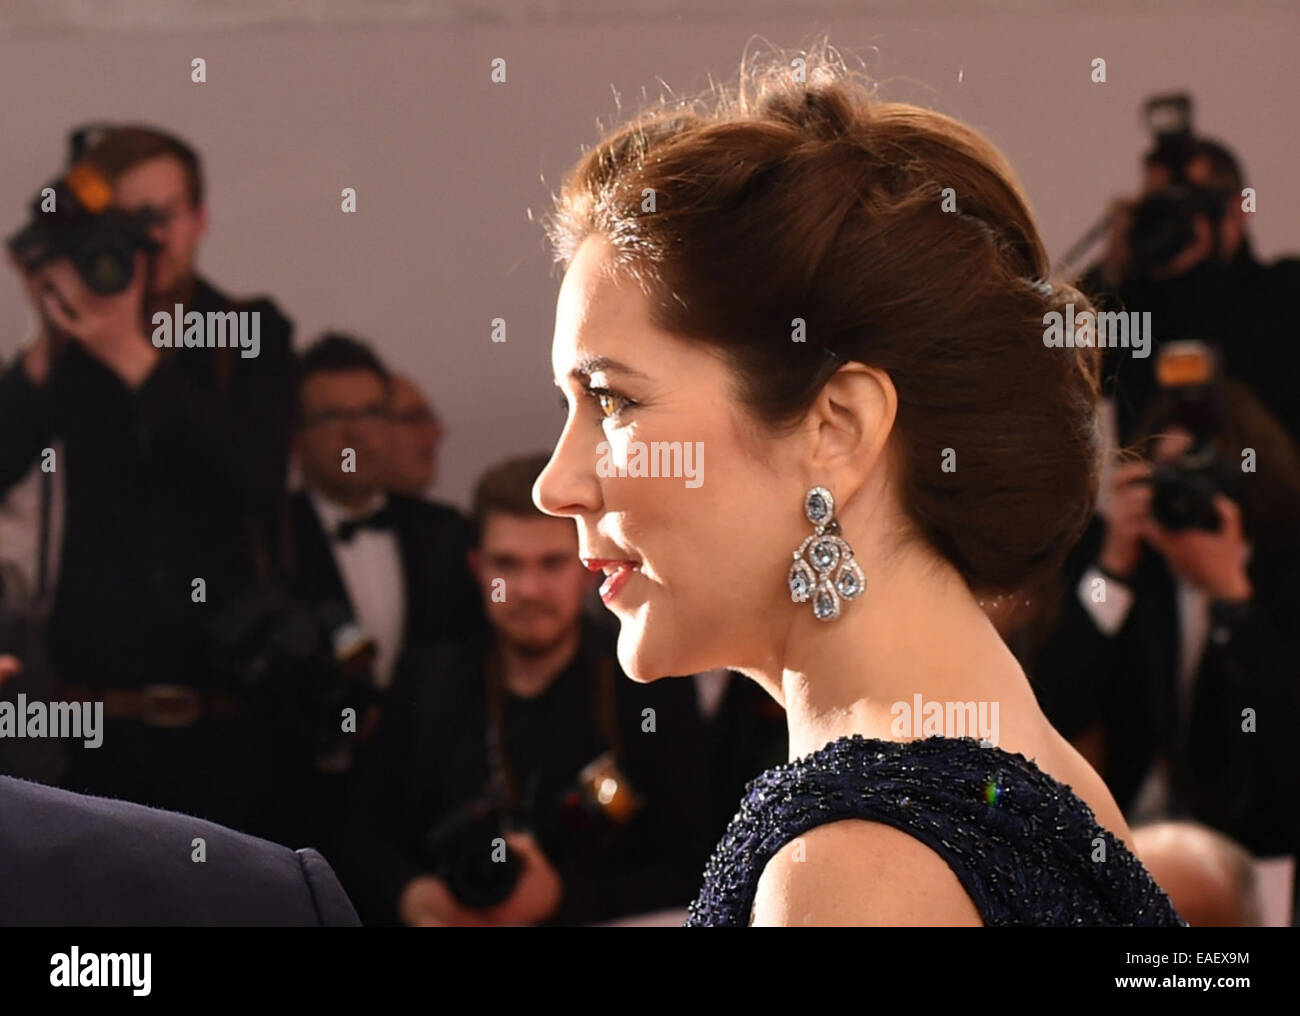 Berlin, Germany. 13th Nov, 2014. Danish Crown Princess Mary arrives on the red carpet area at the Stage Theater before the Bambi Awards at Potsdamer Platz in Berlin, Germany, 13 November 2014. The gala for the 66th Bambi Awards hosted by Hubert Burda Media will take place on 13 November 2014. Photo: Jens Kalaene/dpa/Alamy Live News Stock Photo